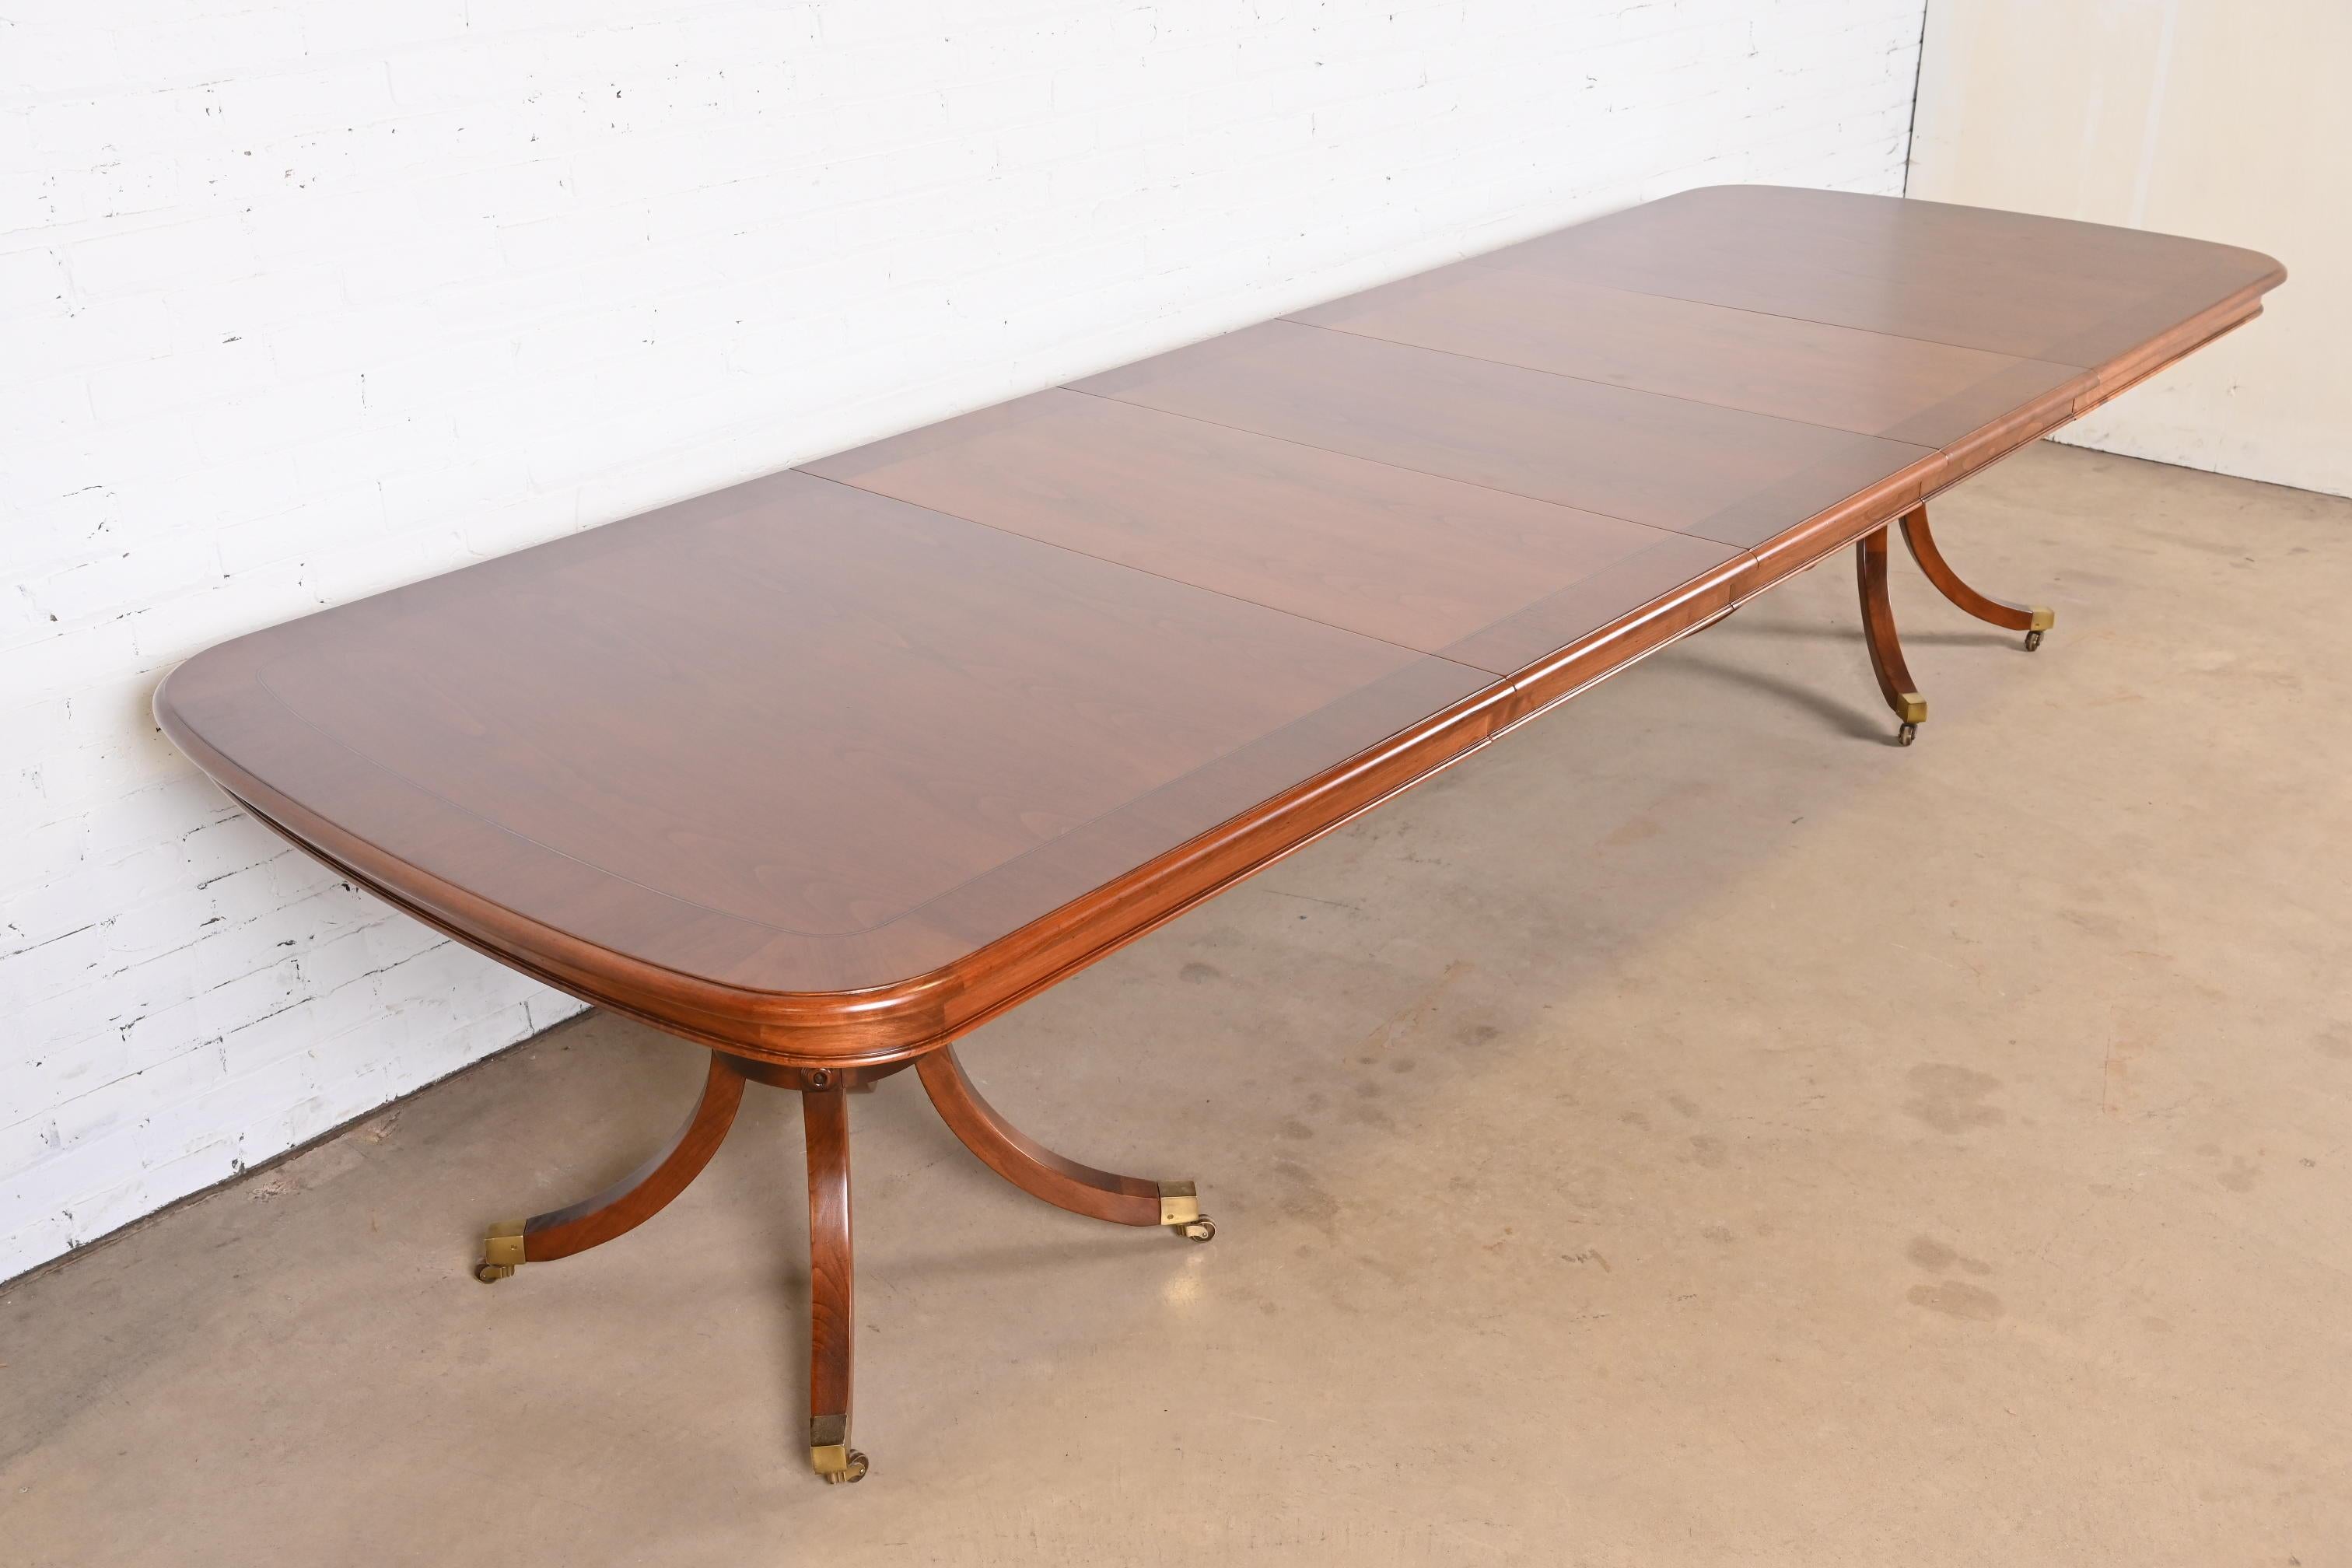 20th Century Baker Furniture Regency Cherry Wood Double Pedestal Dining Table, Refinished For Sale